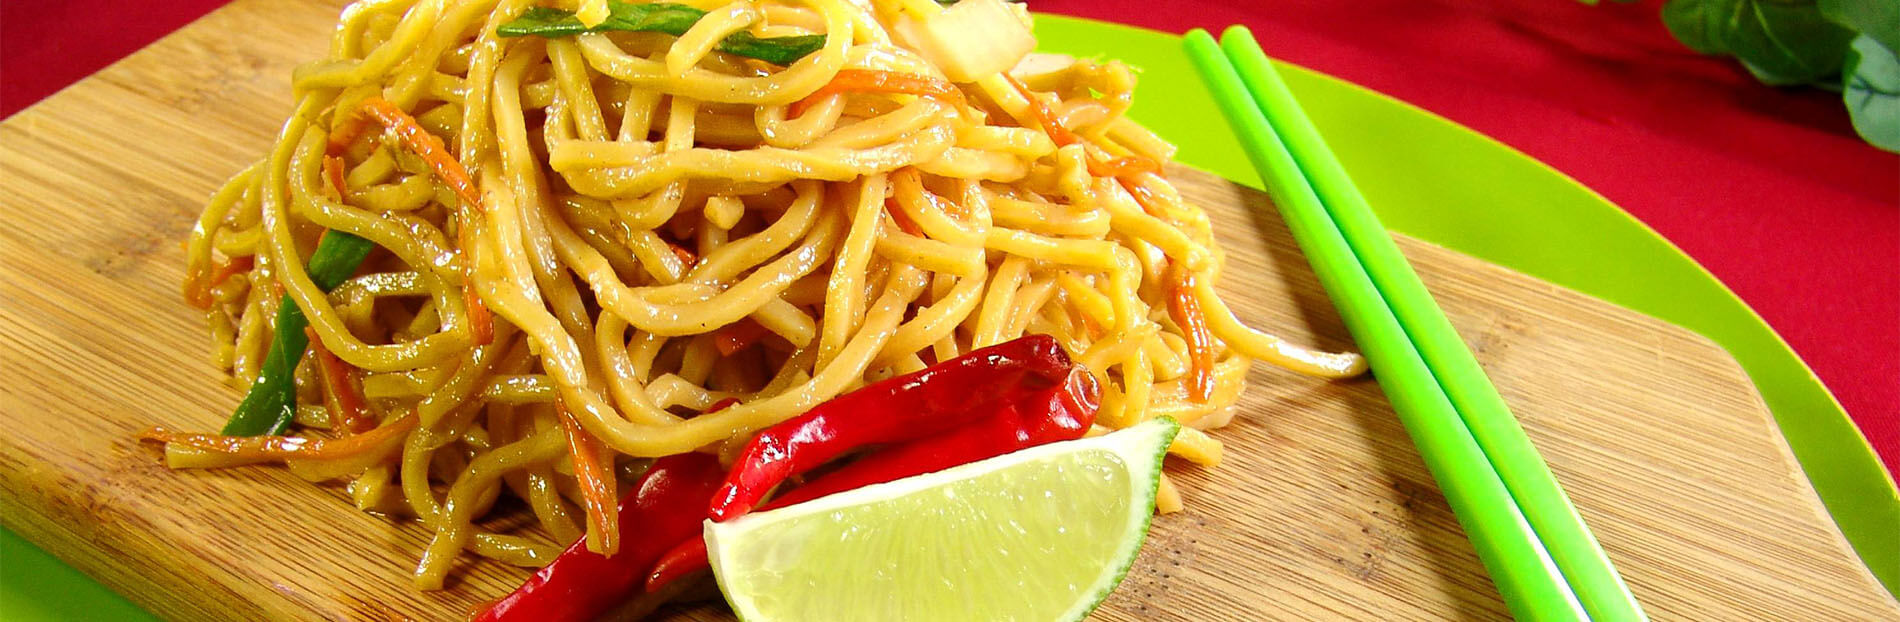 Noodles with chili and lime on a cutting board